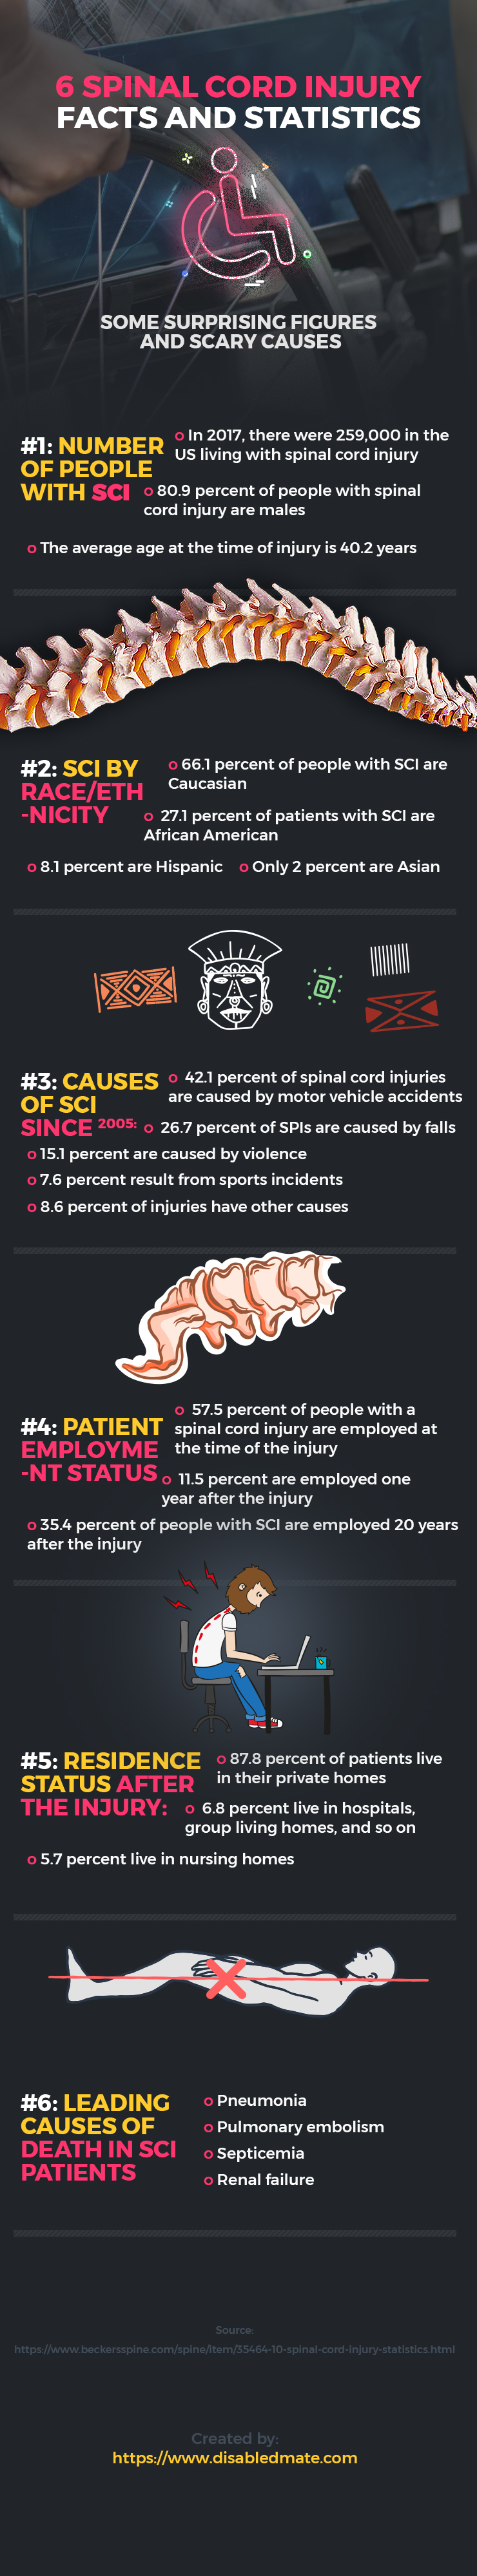 6 Spinal Cord Injury Facts and Statistics